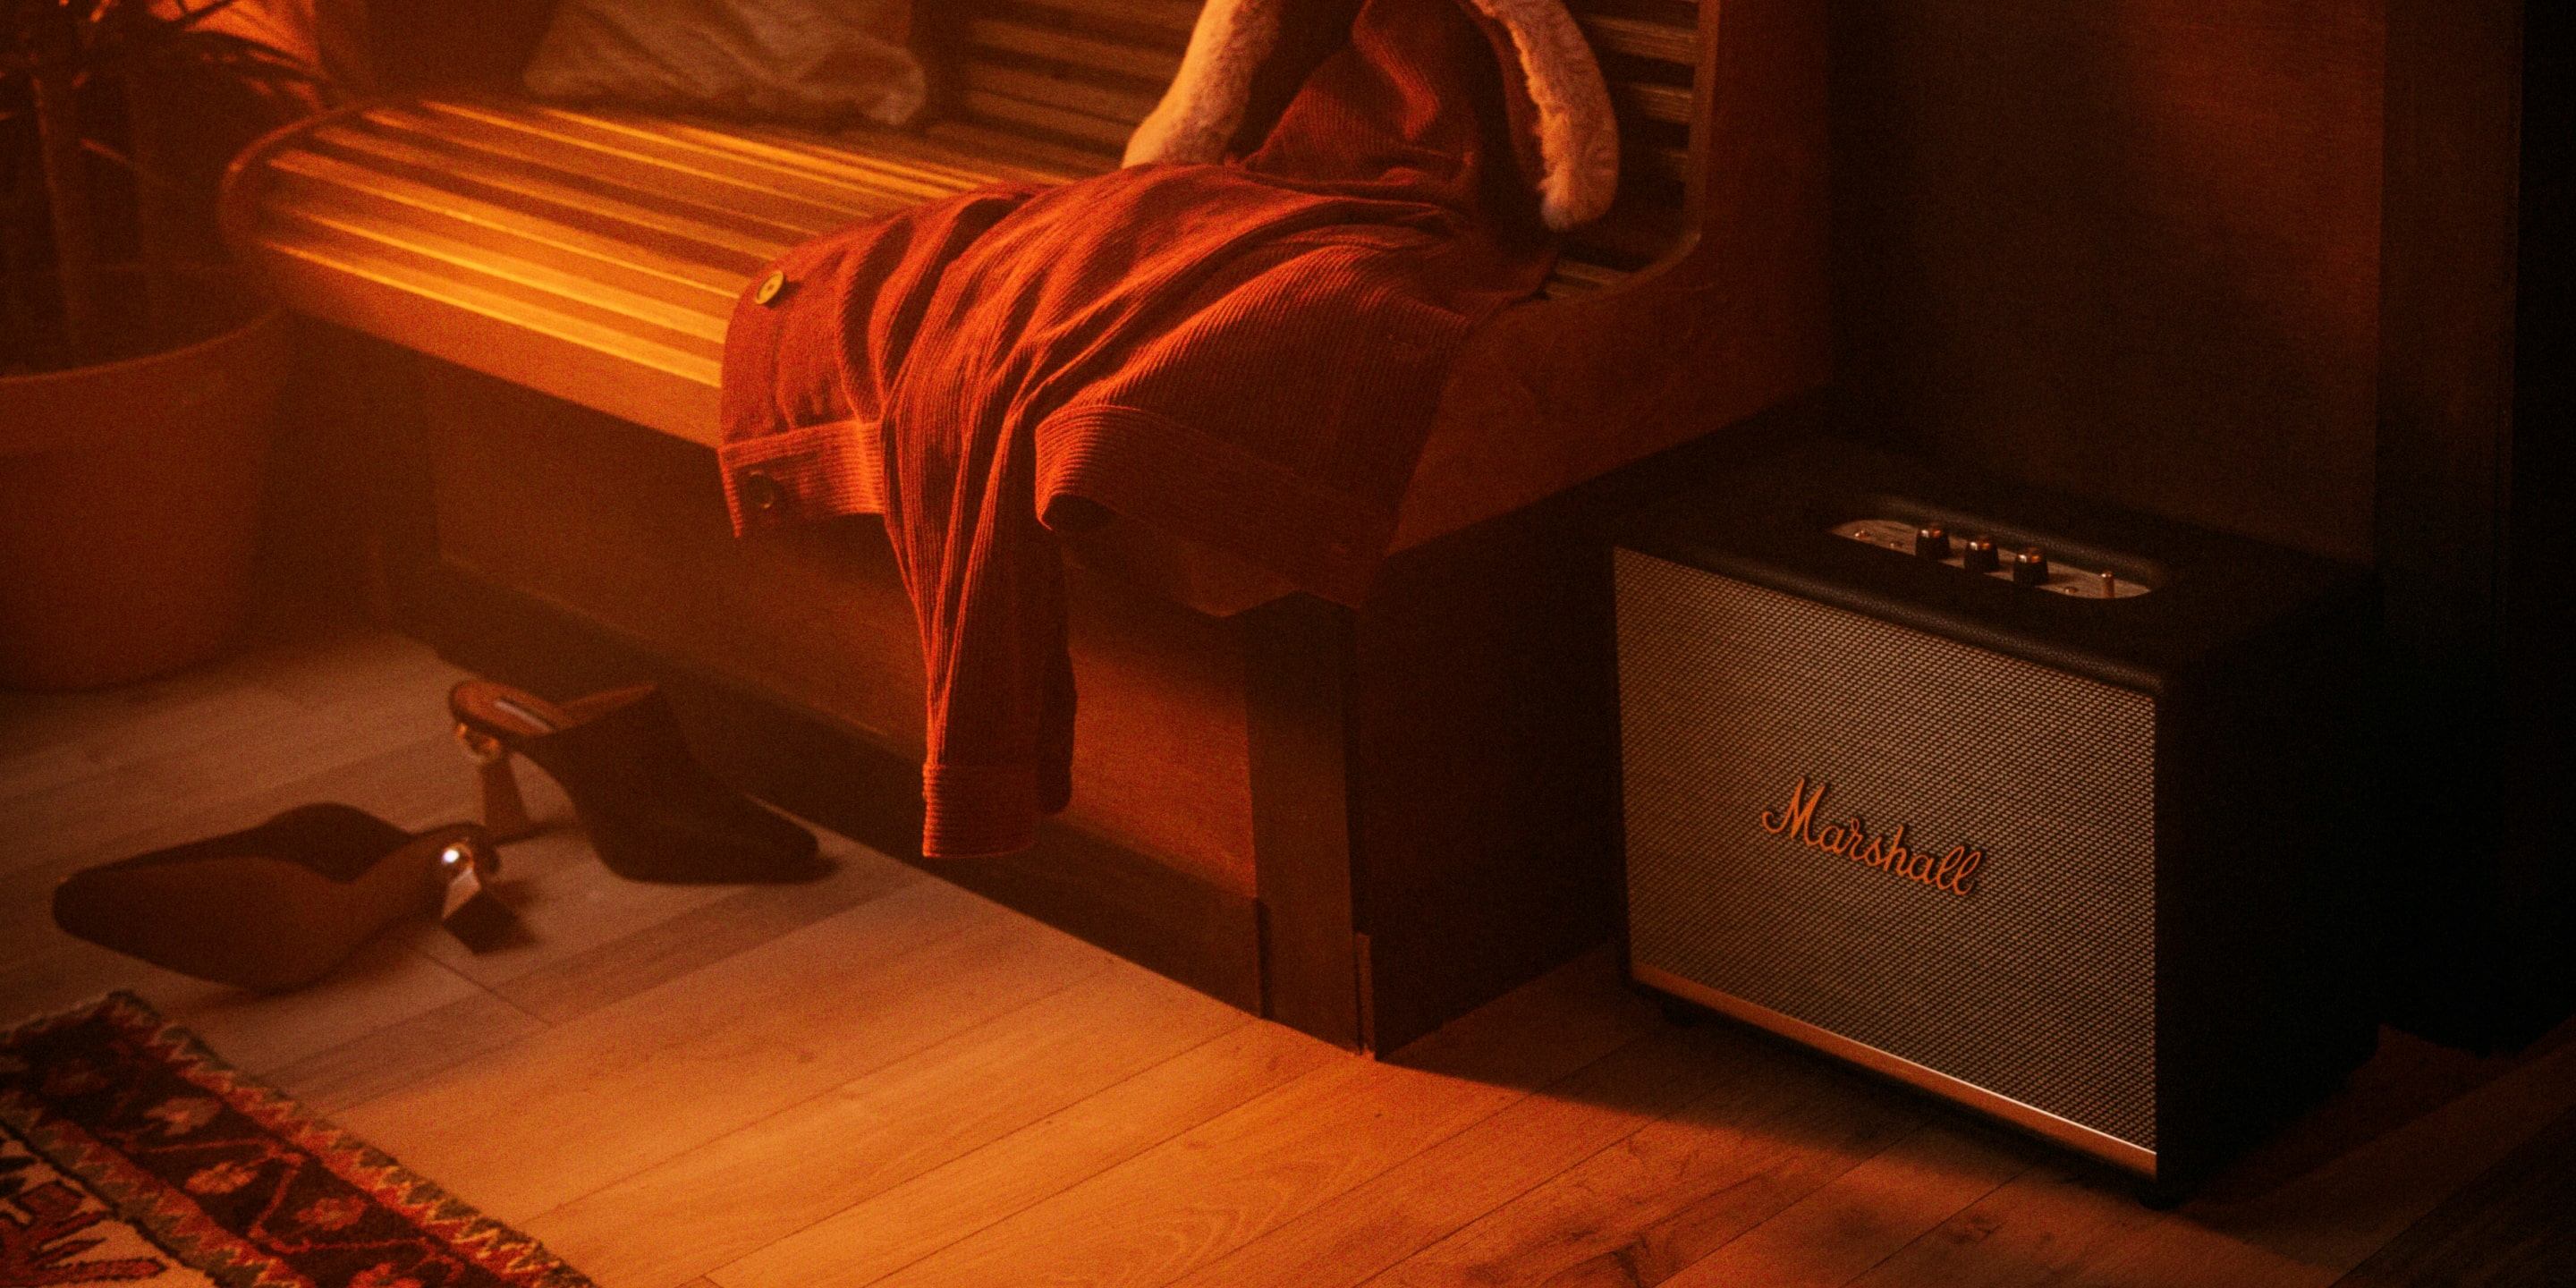 A Refurbished Marshall Speaker placed on the floor, beside the couch of a living room.